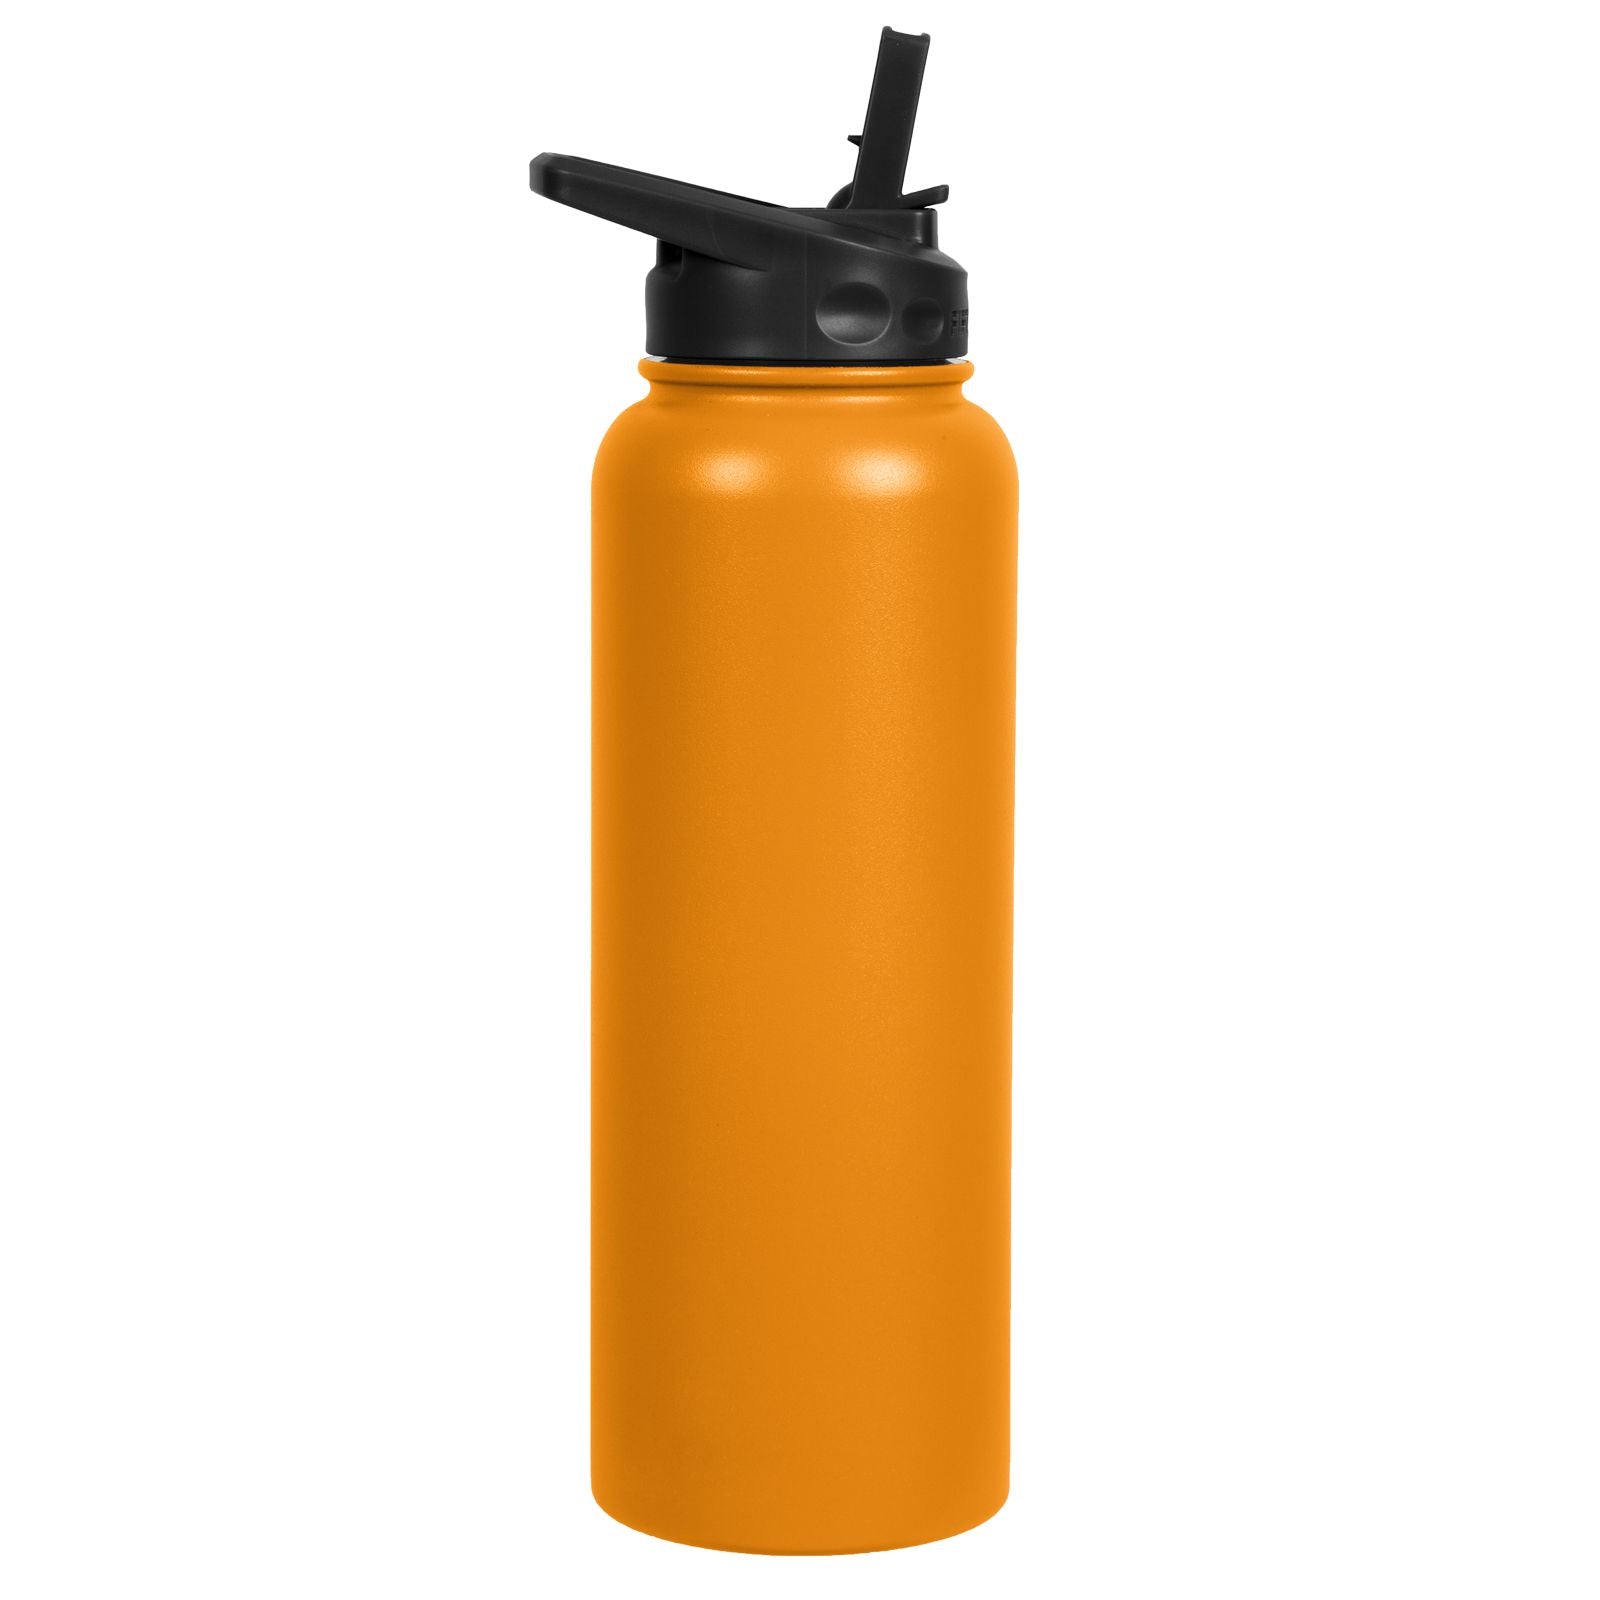 40oz Water Bottle with built-in Straw - Pick your Color - Includes